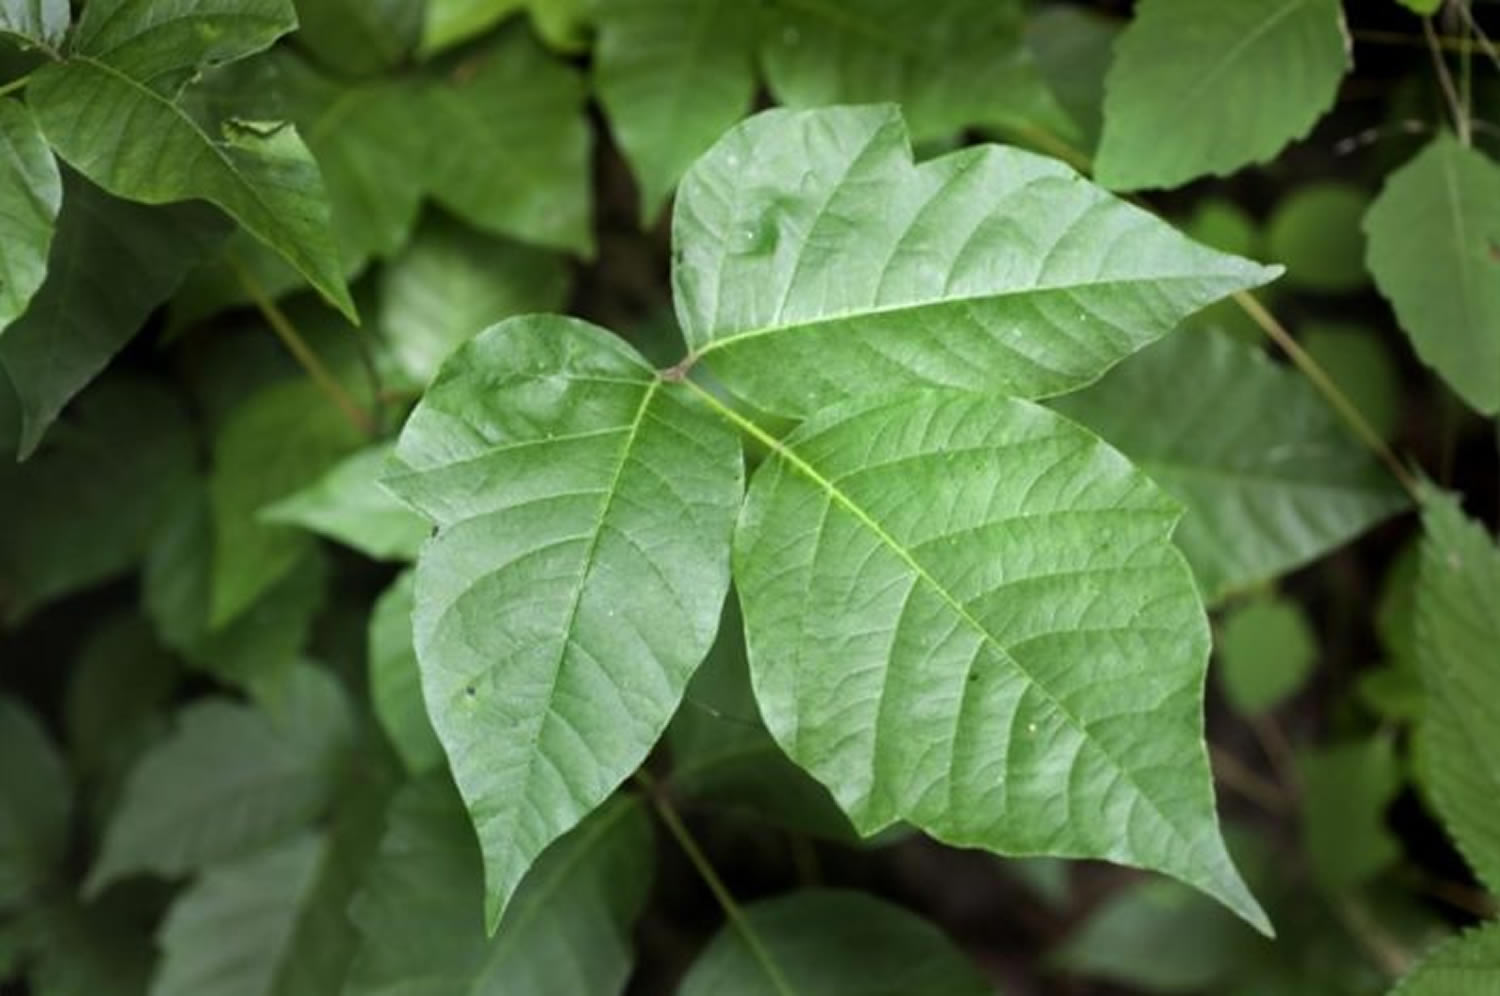 Poison Ivy Rash Causes How To Identify Poison Ivy Rash And Treatment